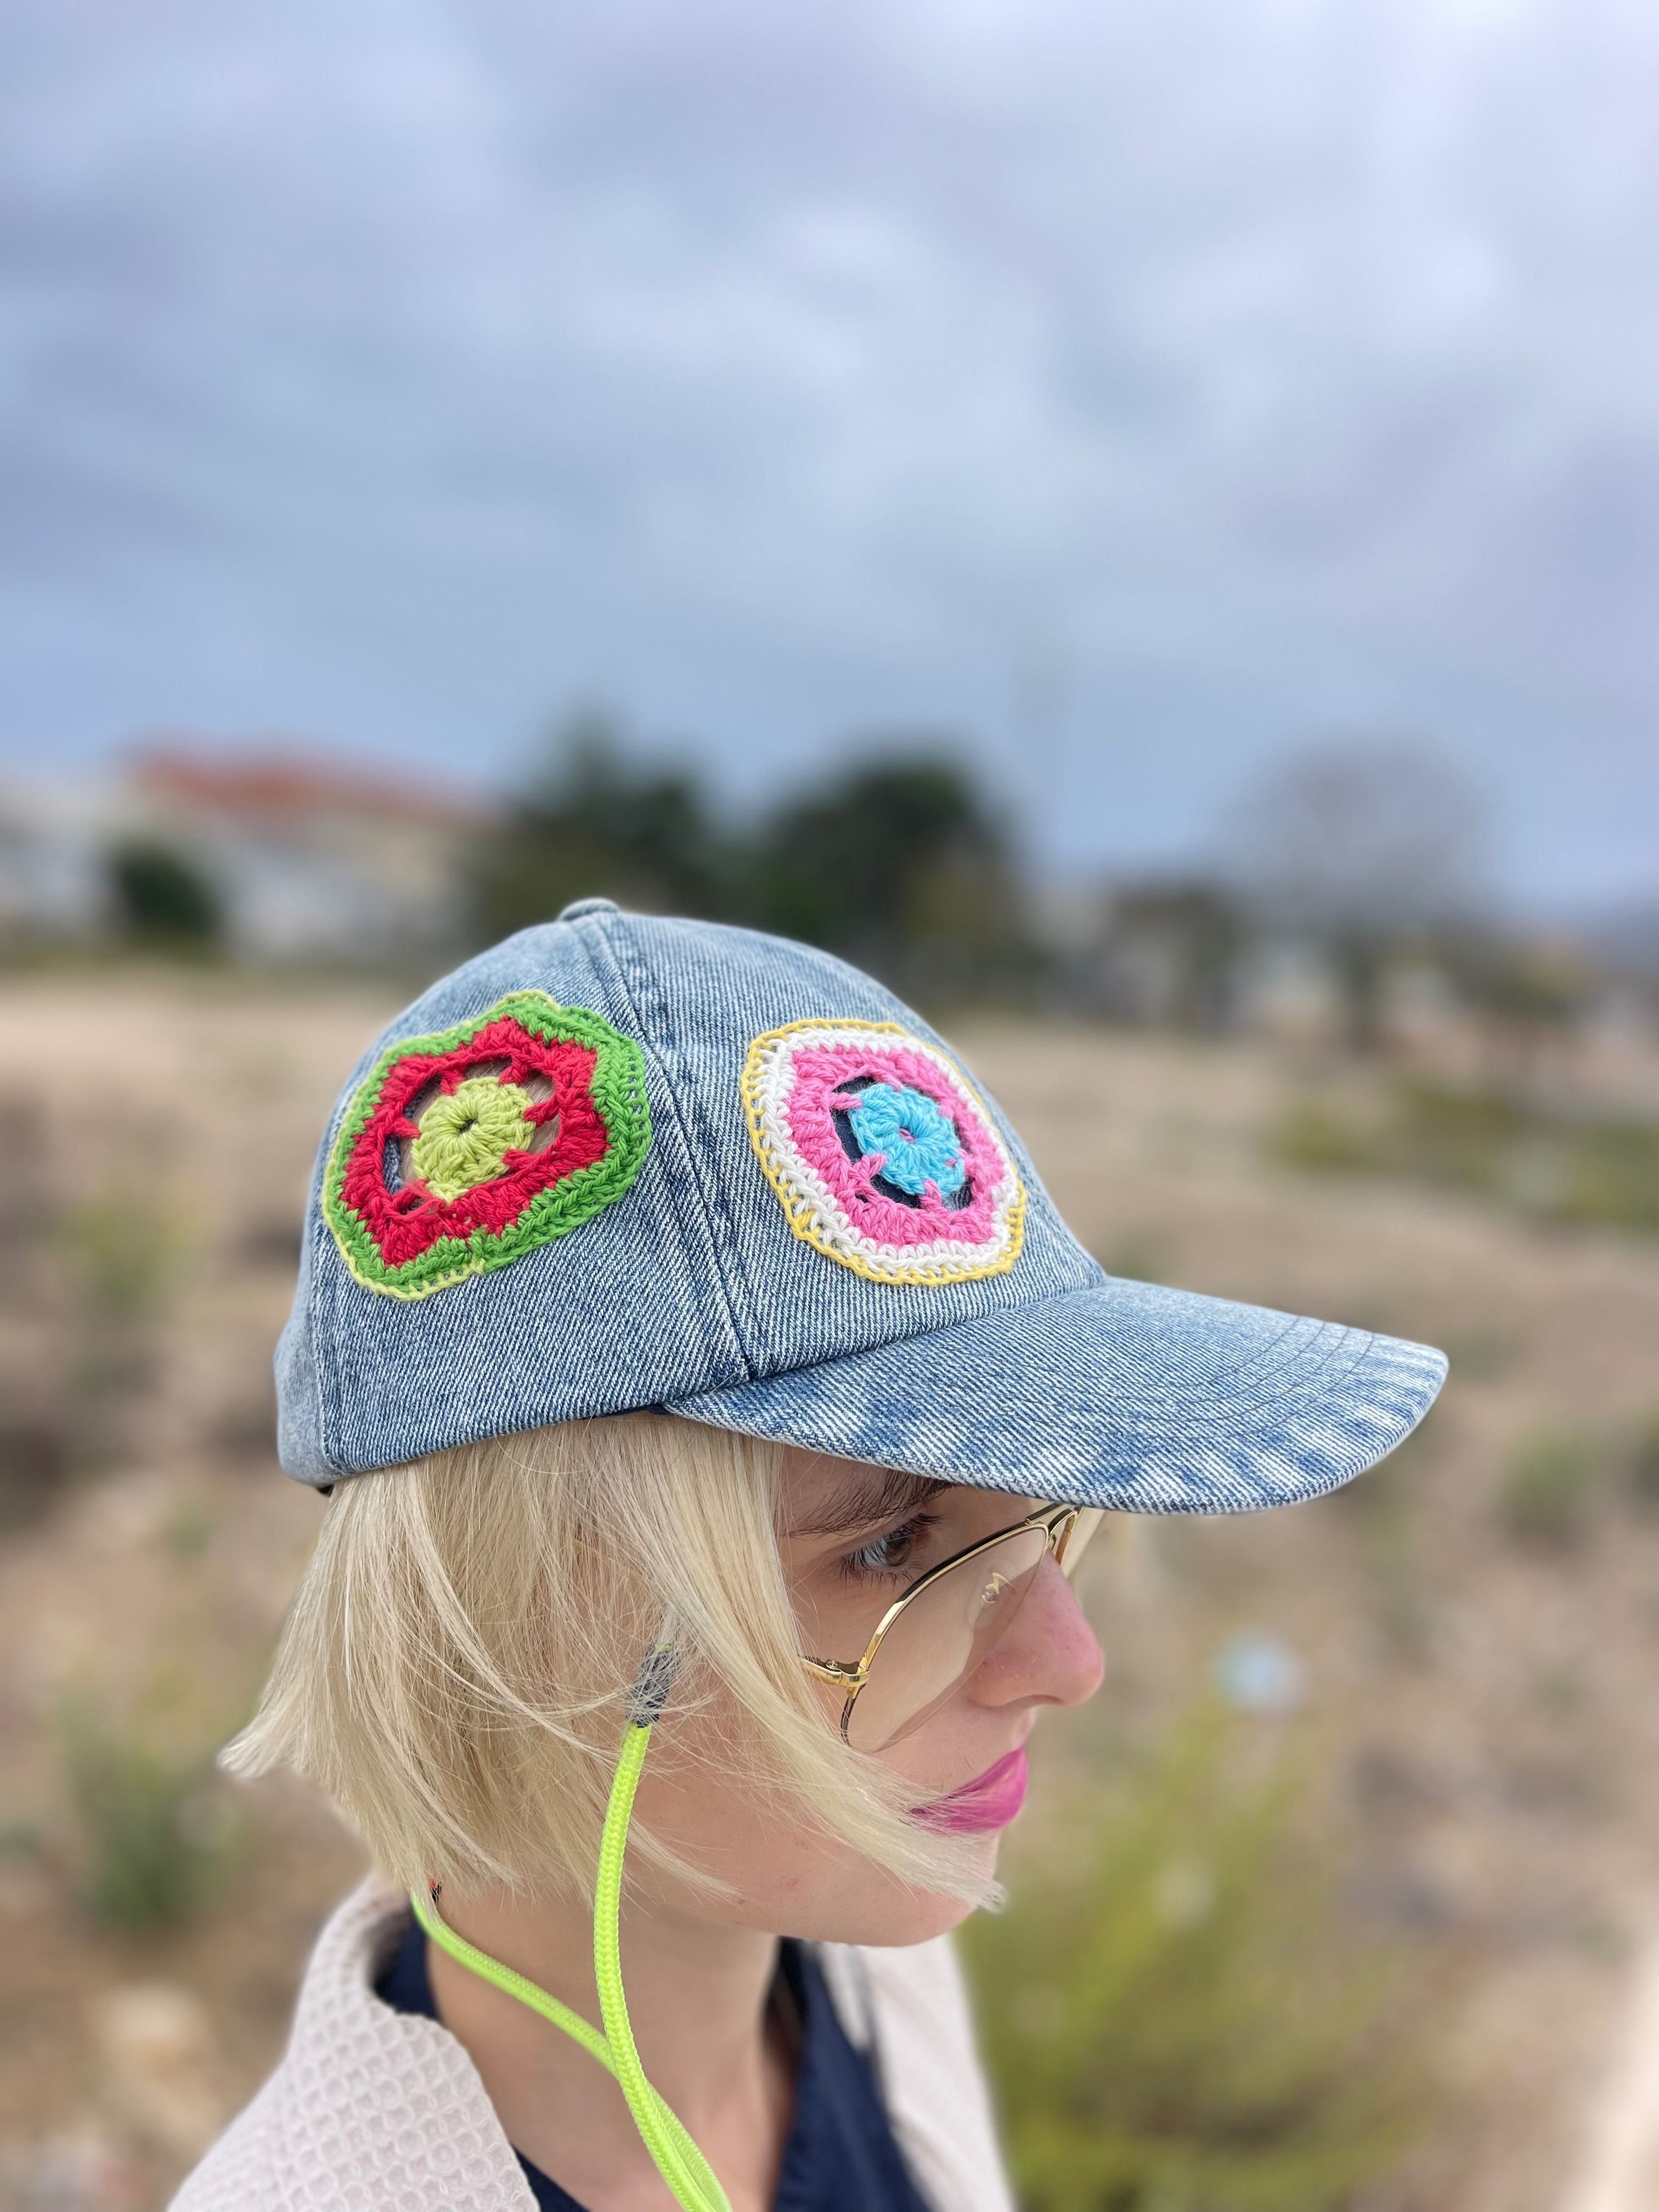 Customized denim cap with knitted flower patches don.bacon